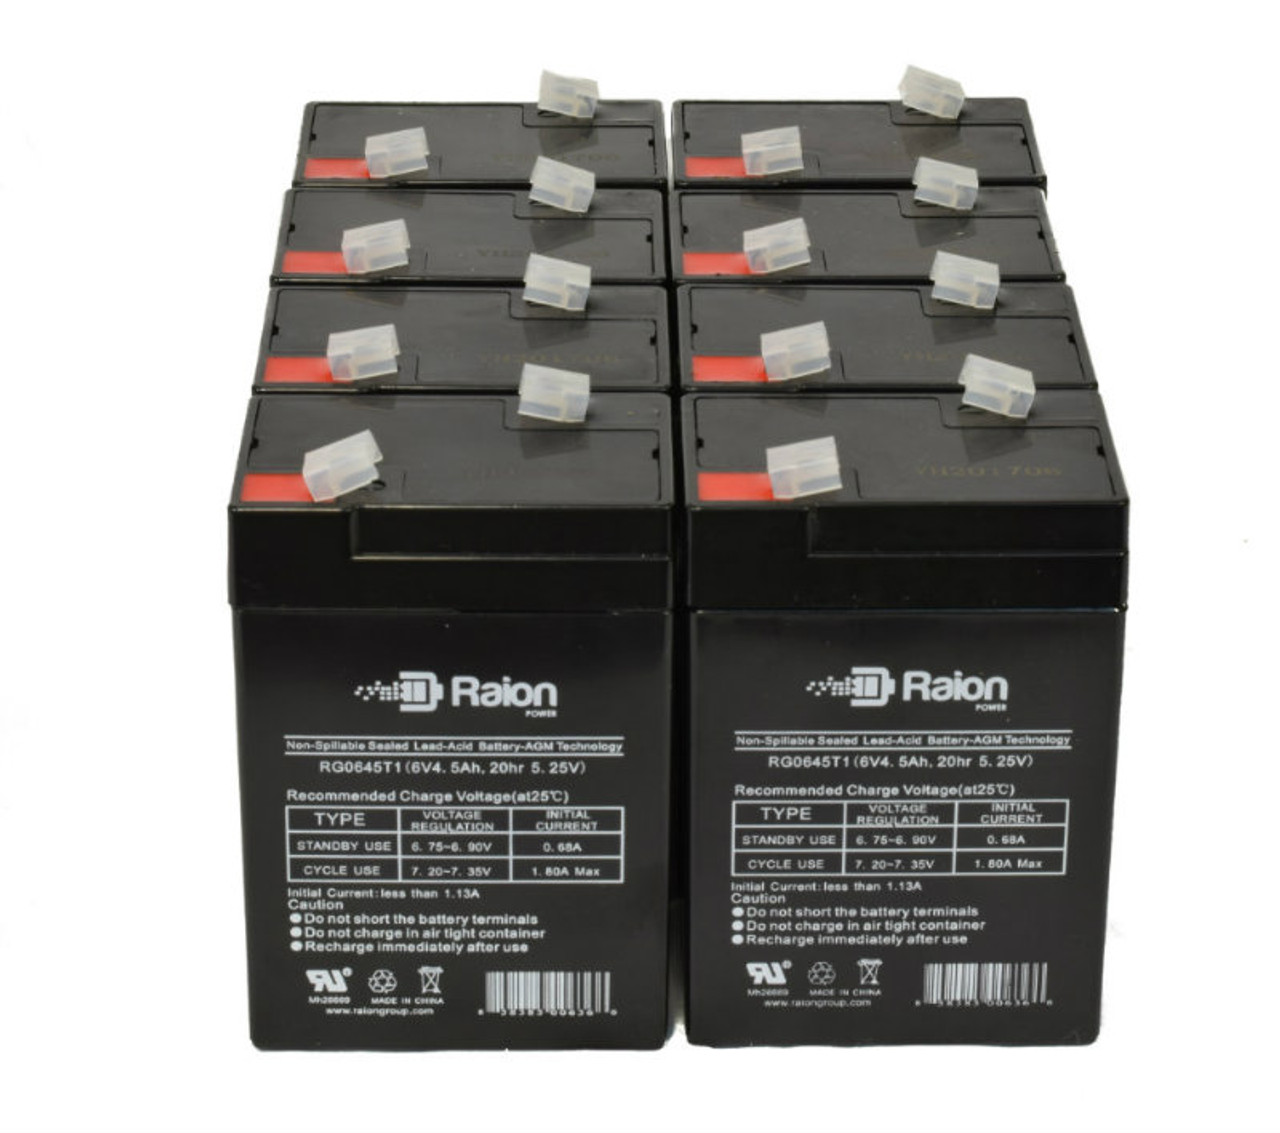 Raion Power 6 Volt 4.5Ah RG0645T1 Replacement Battery for Wing ES 4-6 - 8 Pack